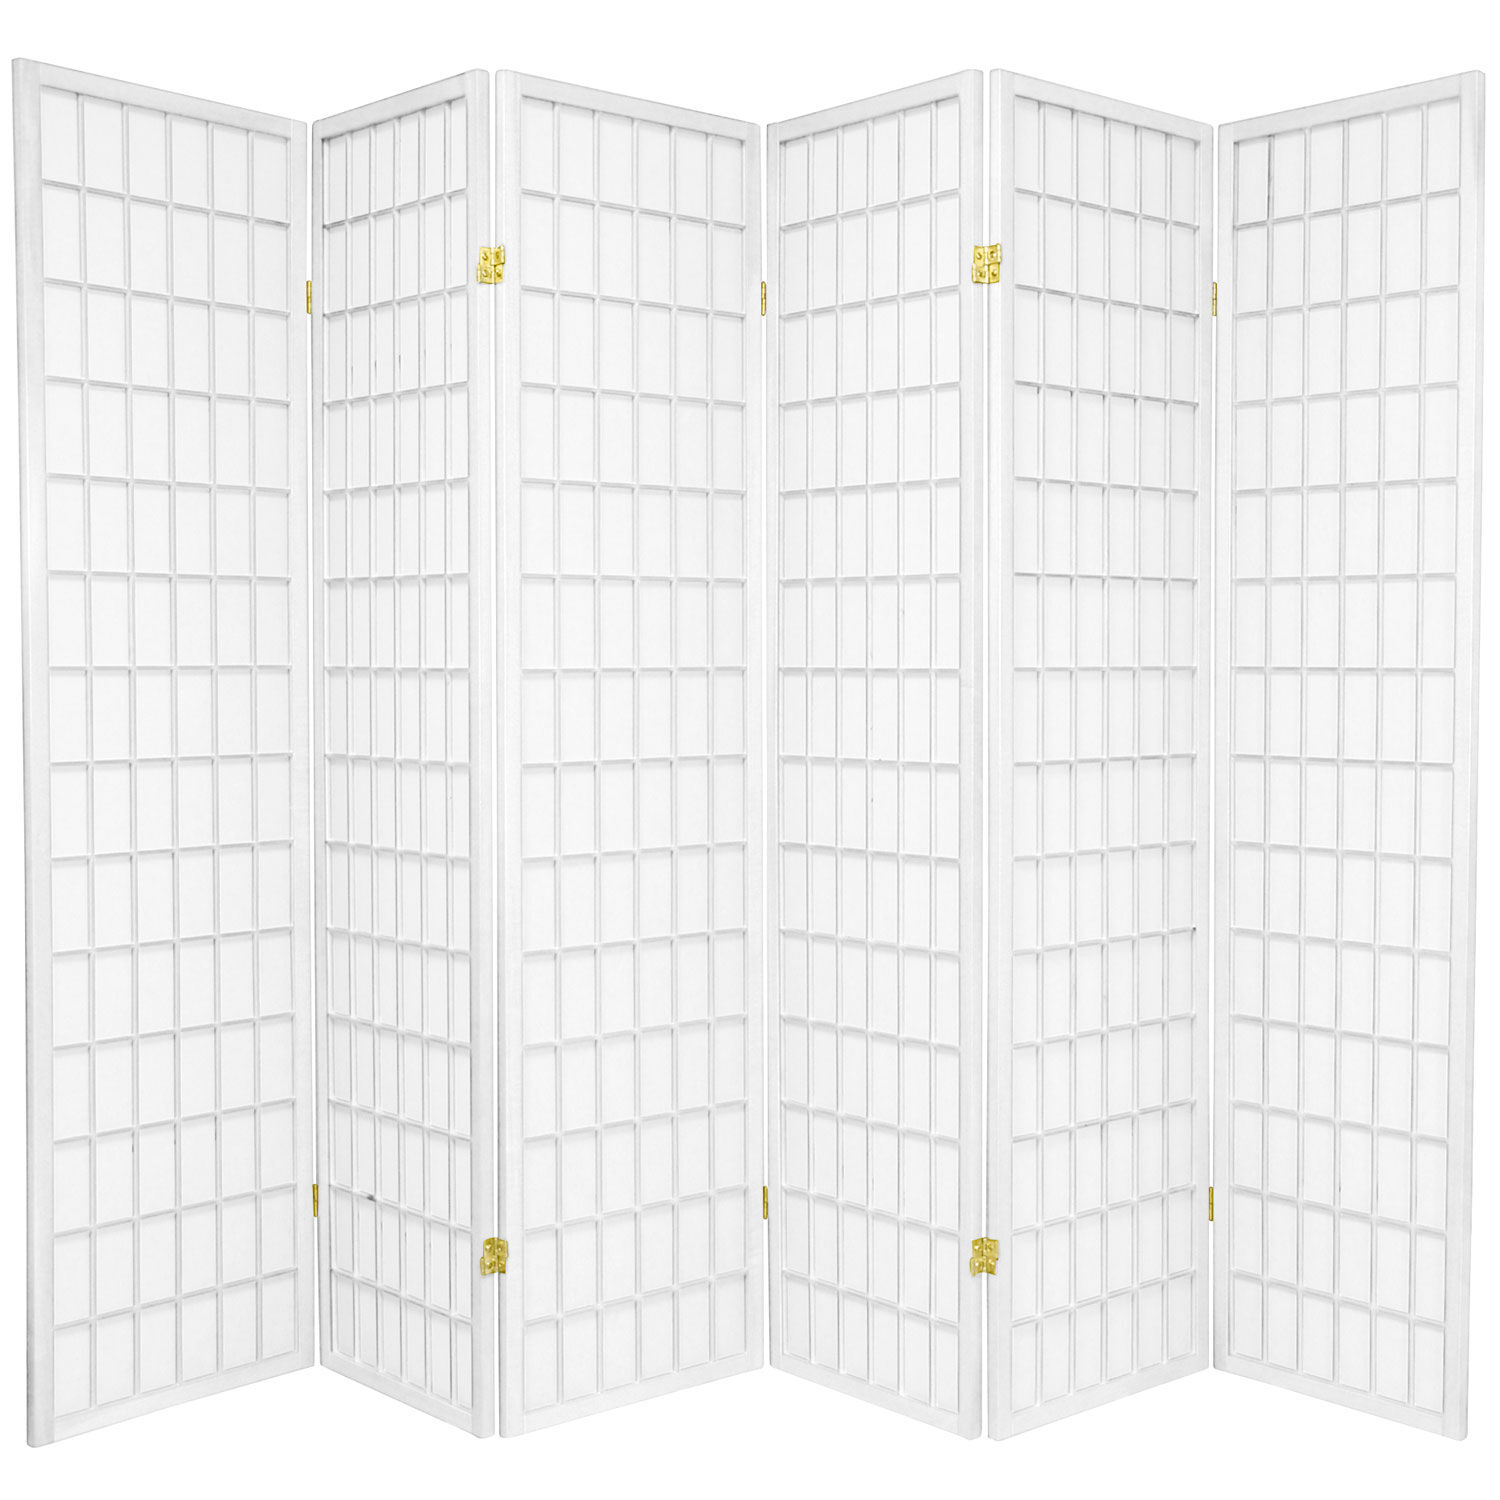 Details about   HONGVILLE Shoji 3-12 Panel White，Paper Screen Wood Panel Privacy Room Divider 